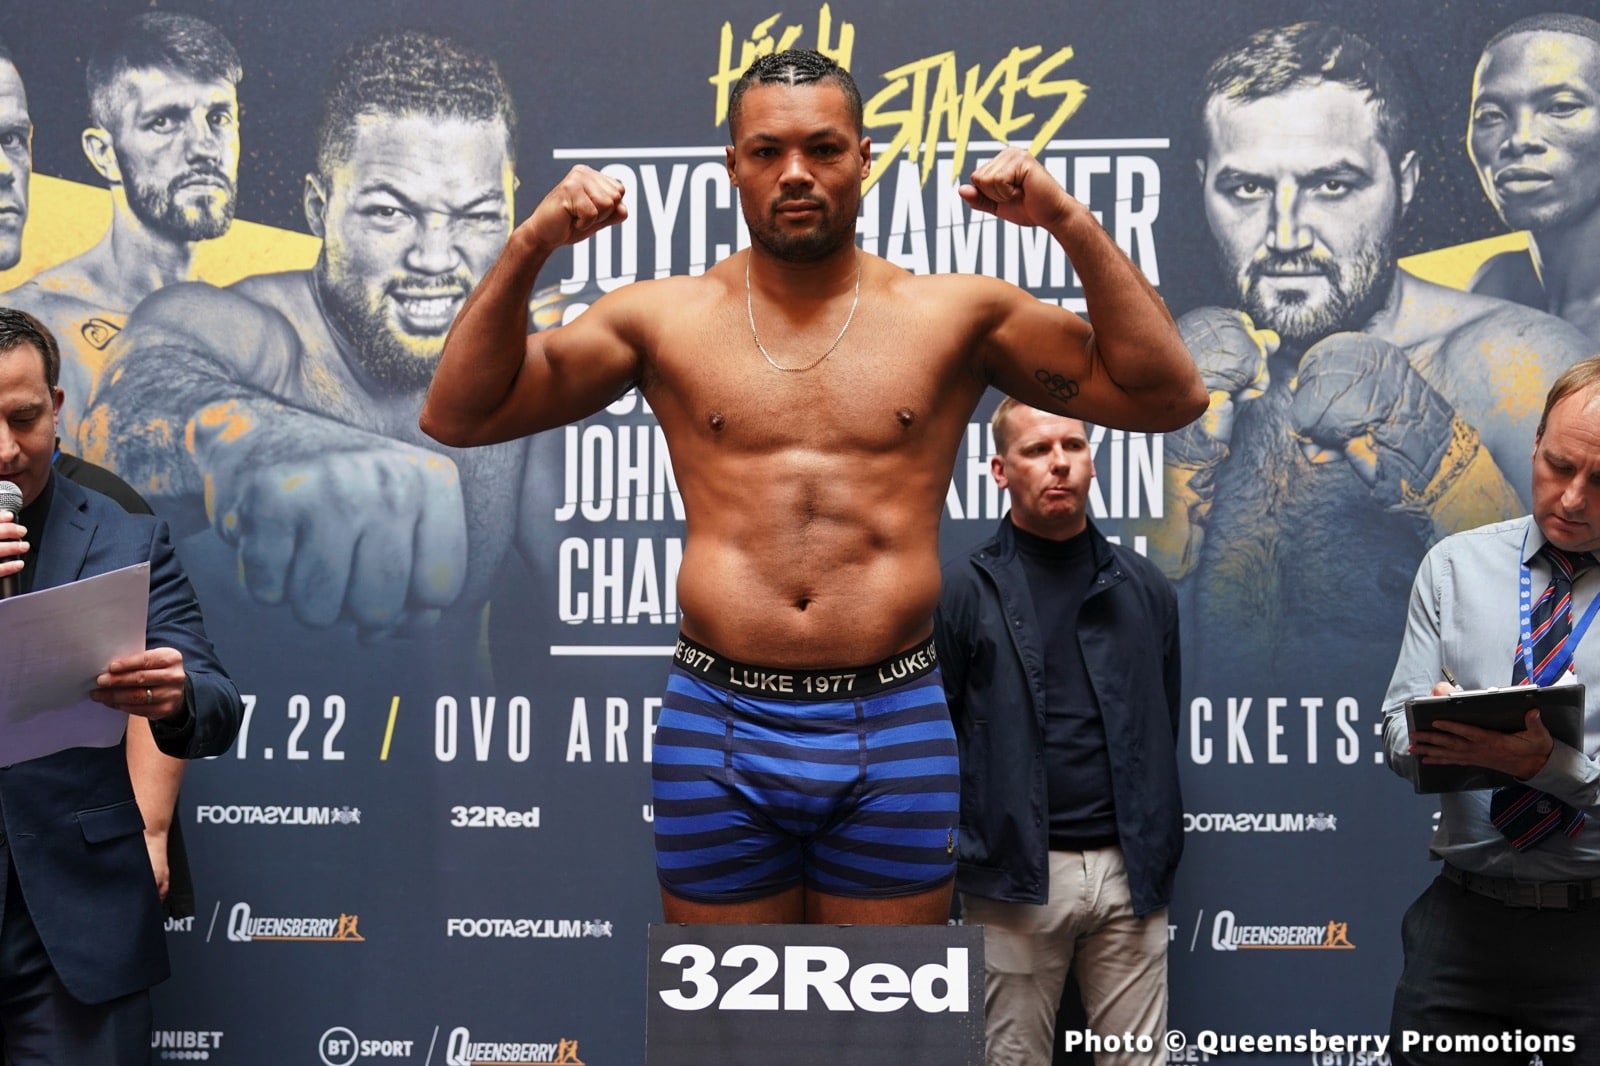 Image: Joyce vs Hammer Official BT Sport Weigh In Results